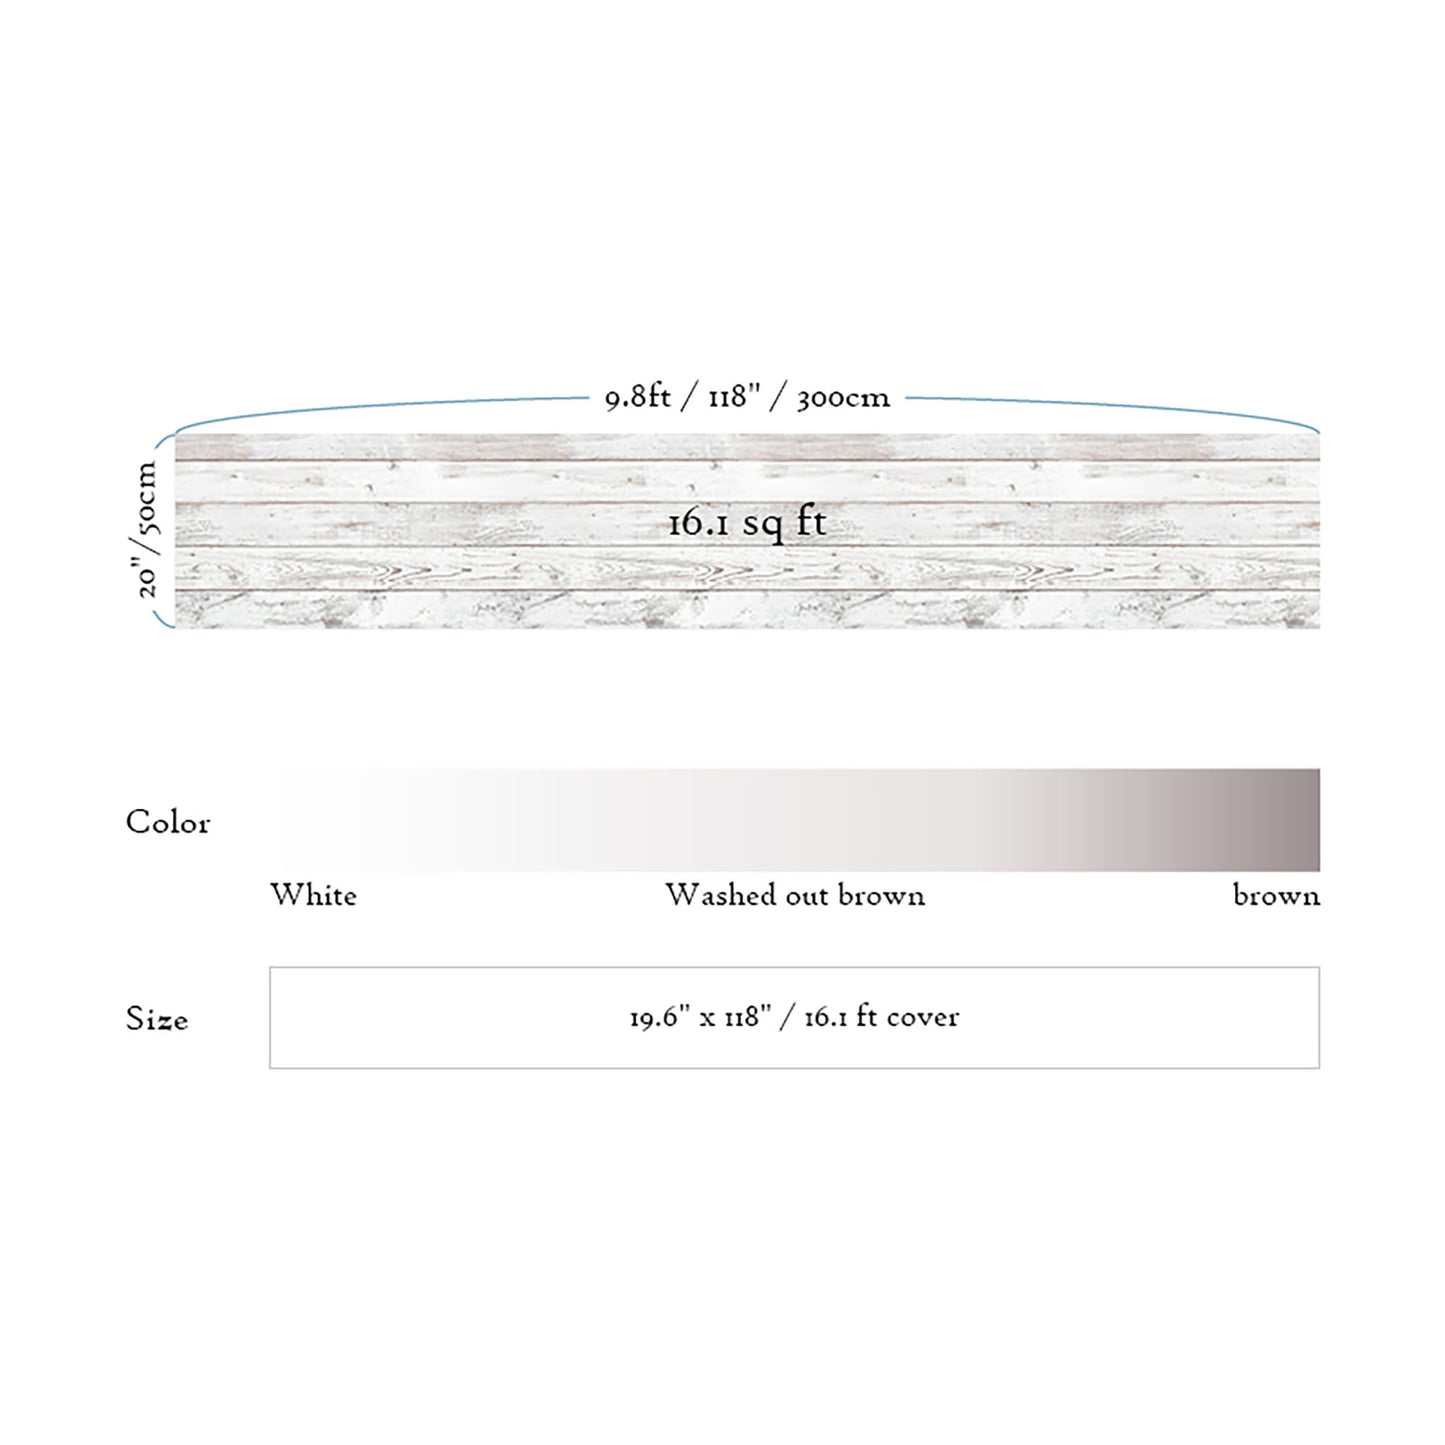 Distressed Wood Light Texture, Washed White Panel Wallpaper